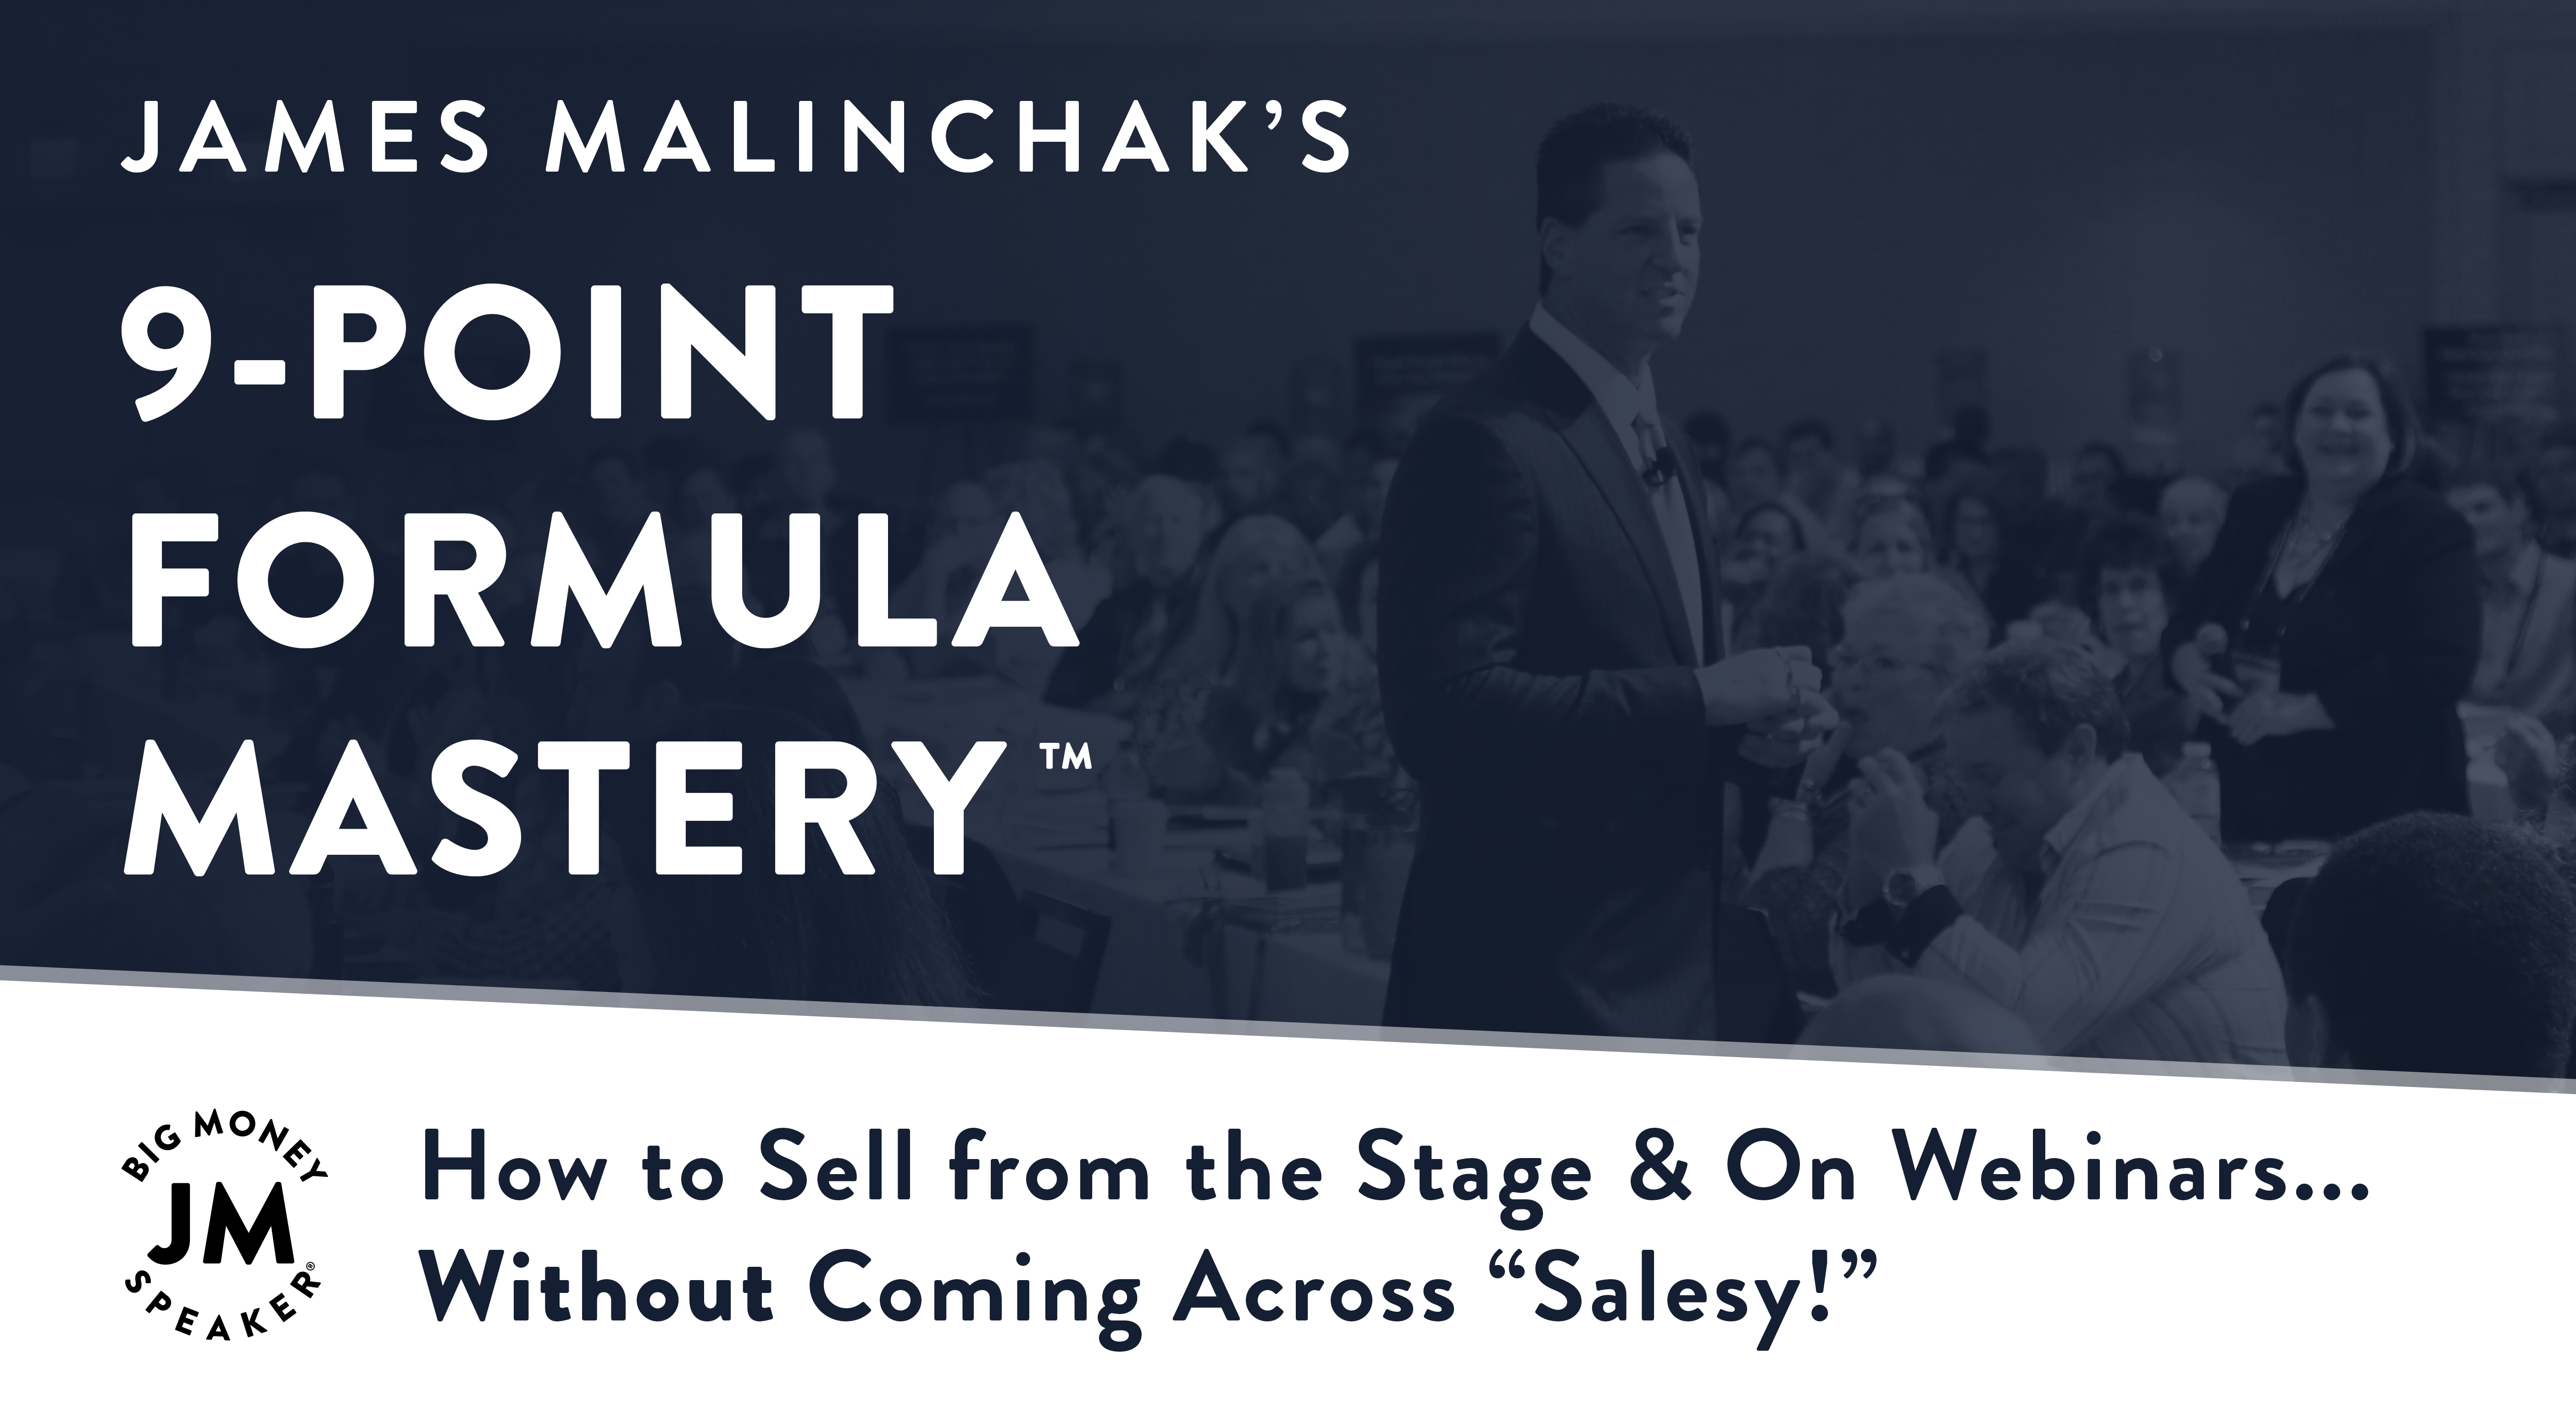 How To Sell From The Stage & On Webinars